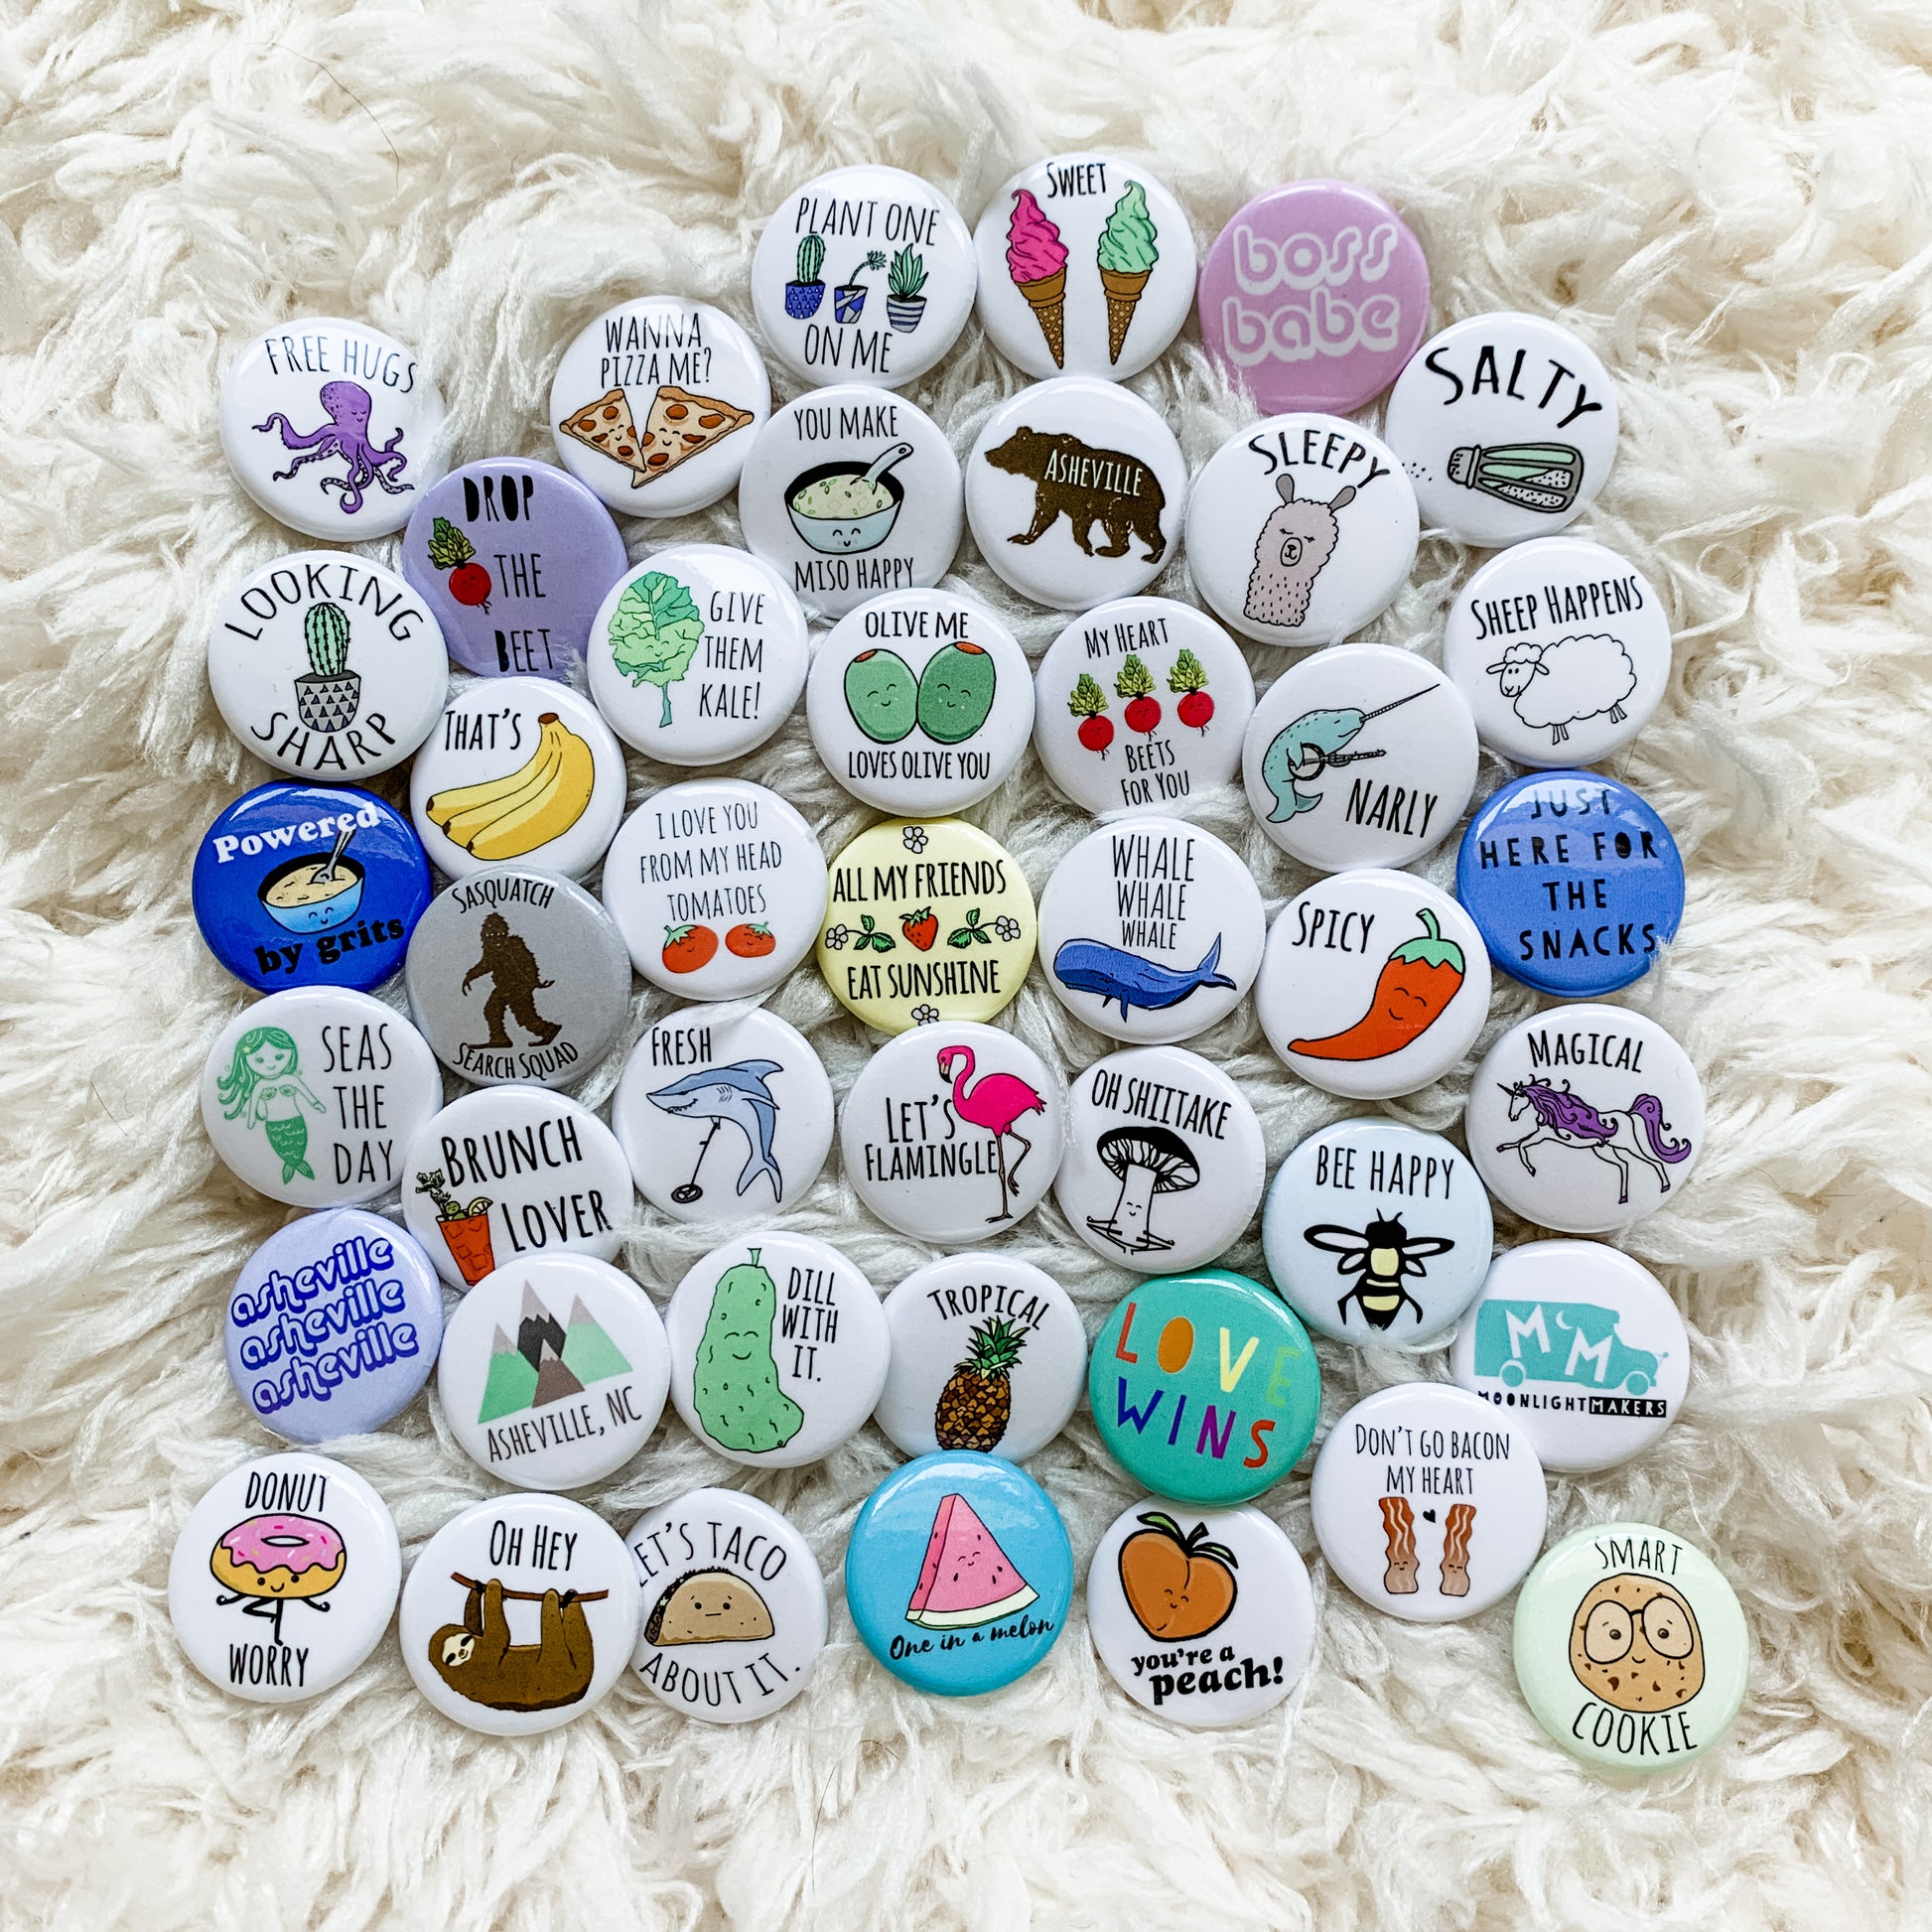 Happy Valentines Day Pins and Buttons for Sale